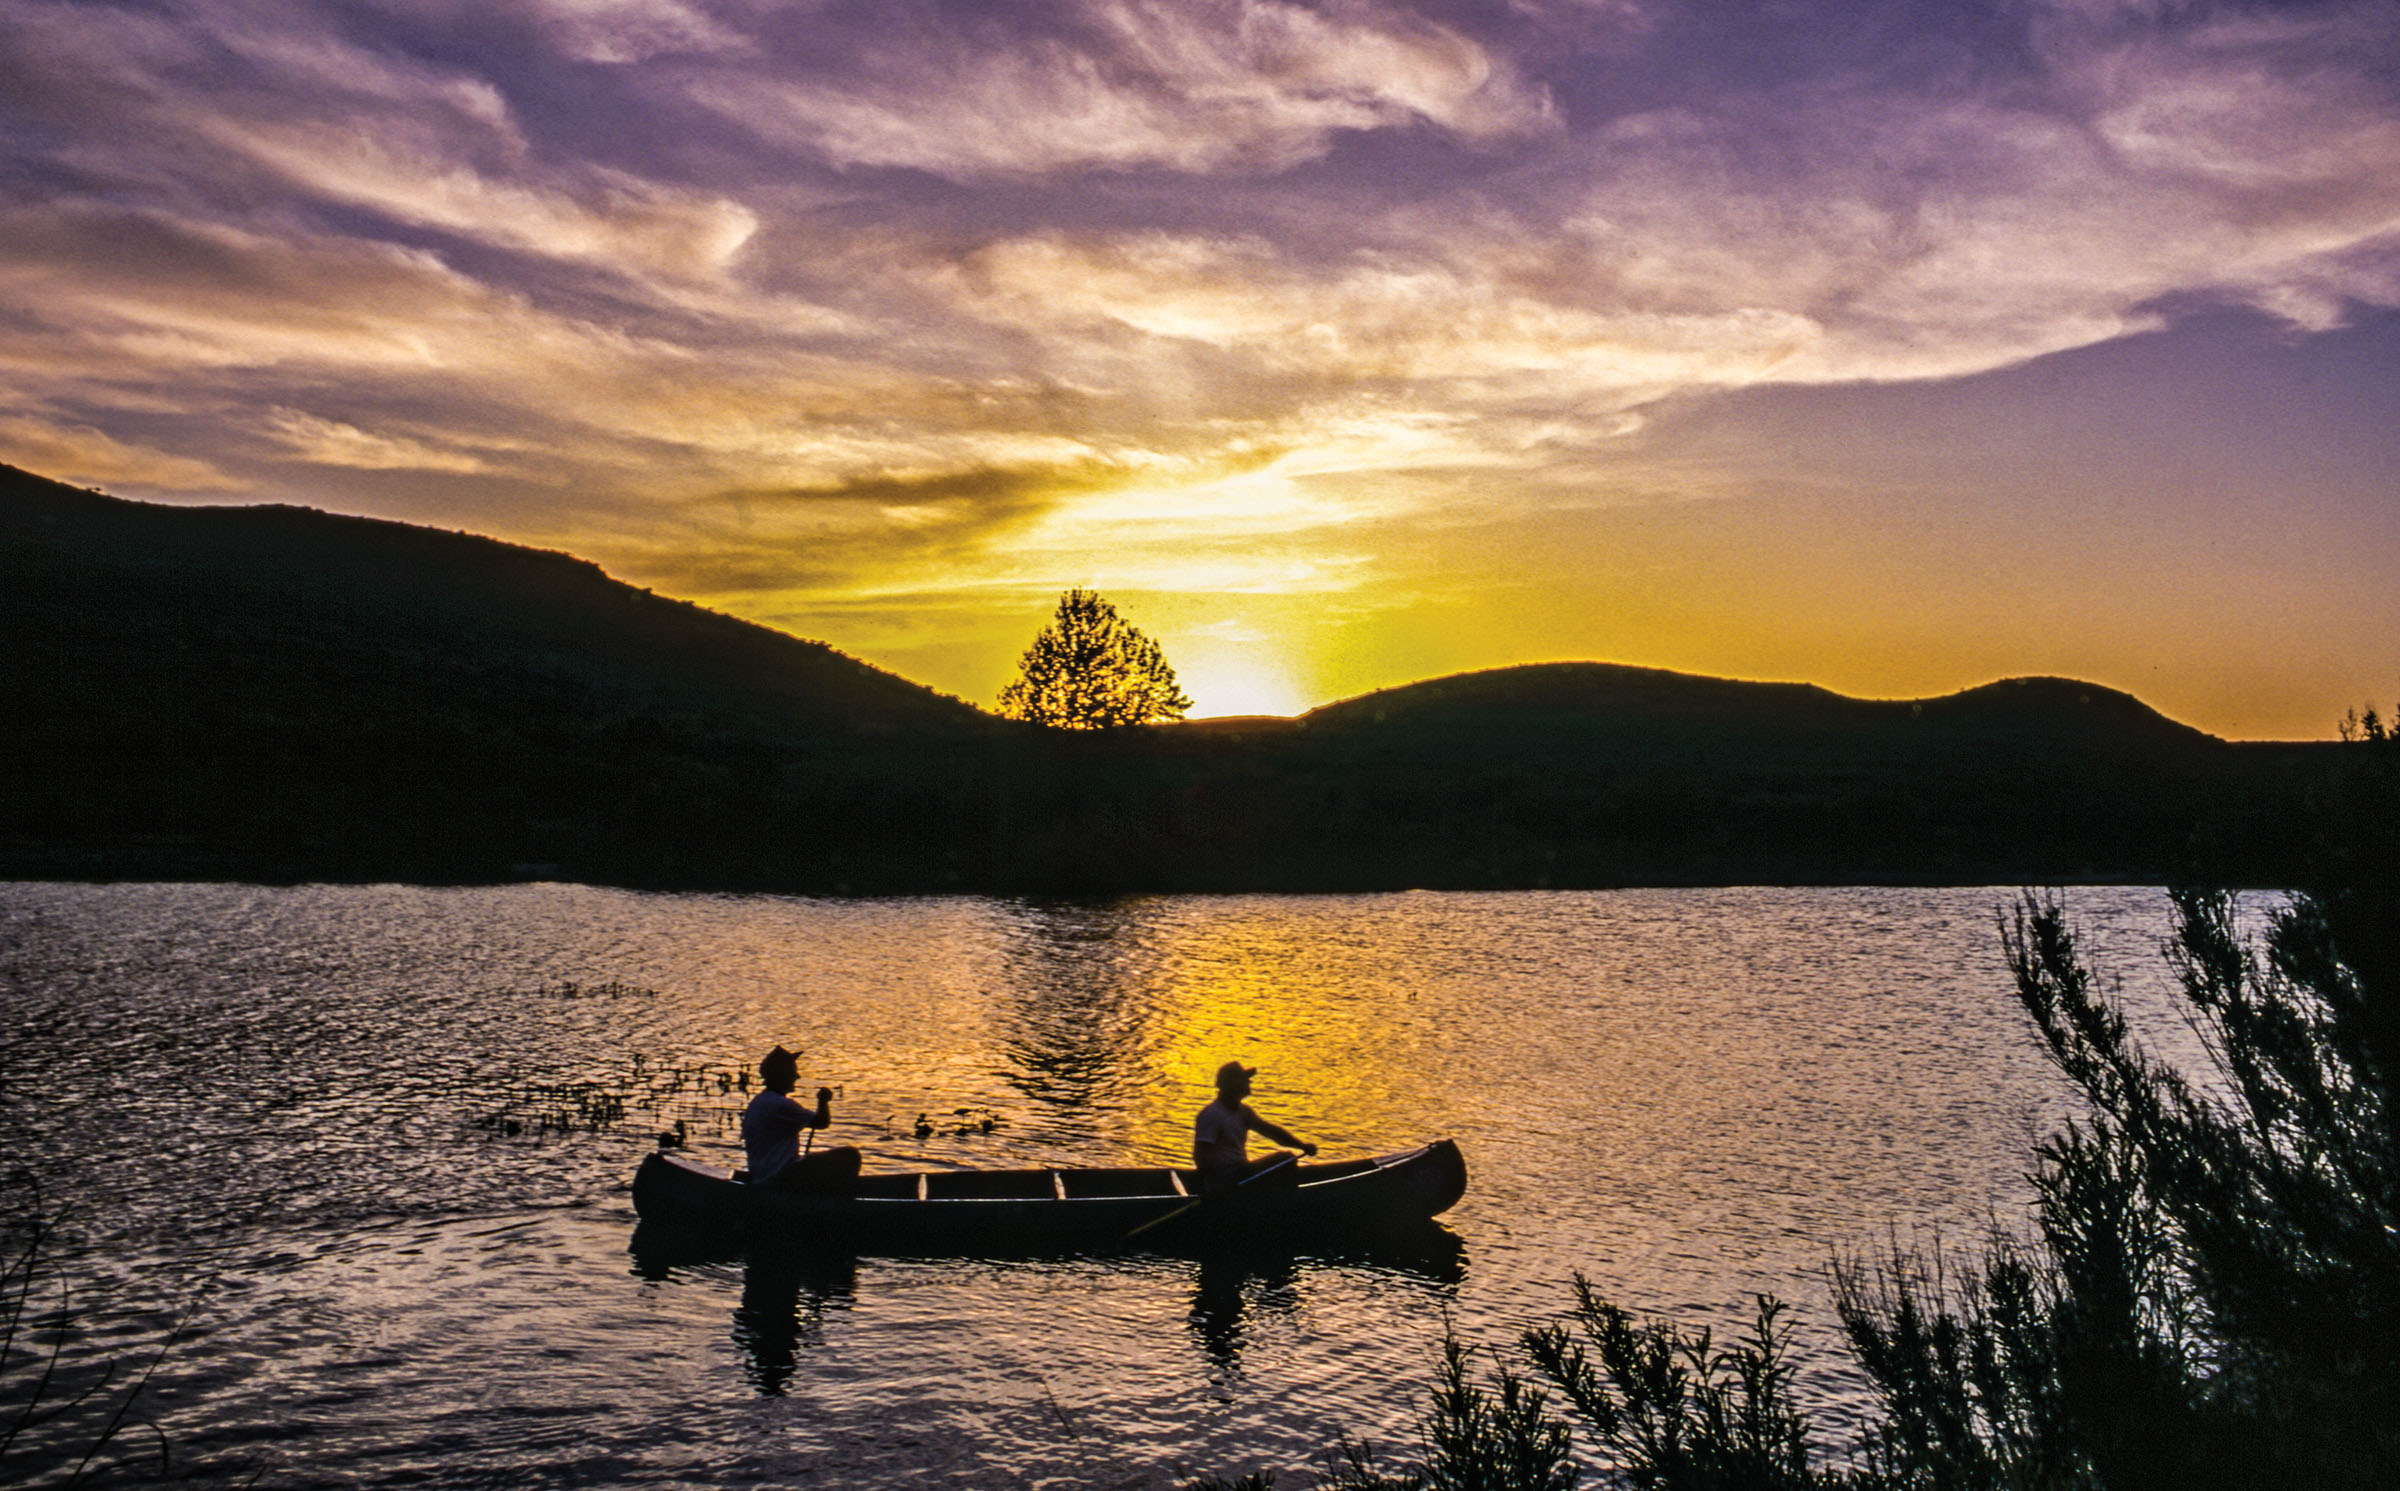 Two people paddle a canoe in front of a sunset over dark hills